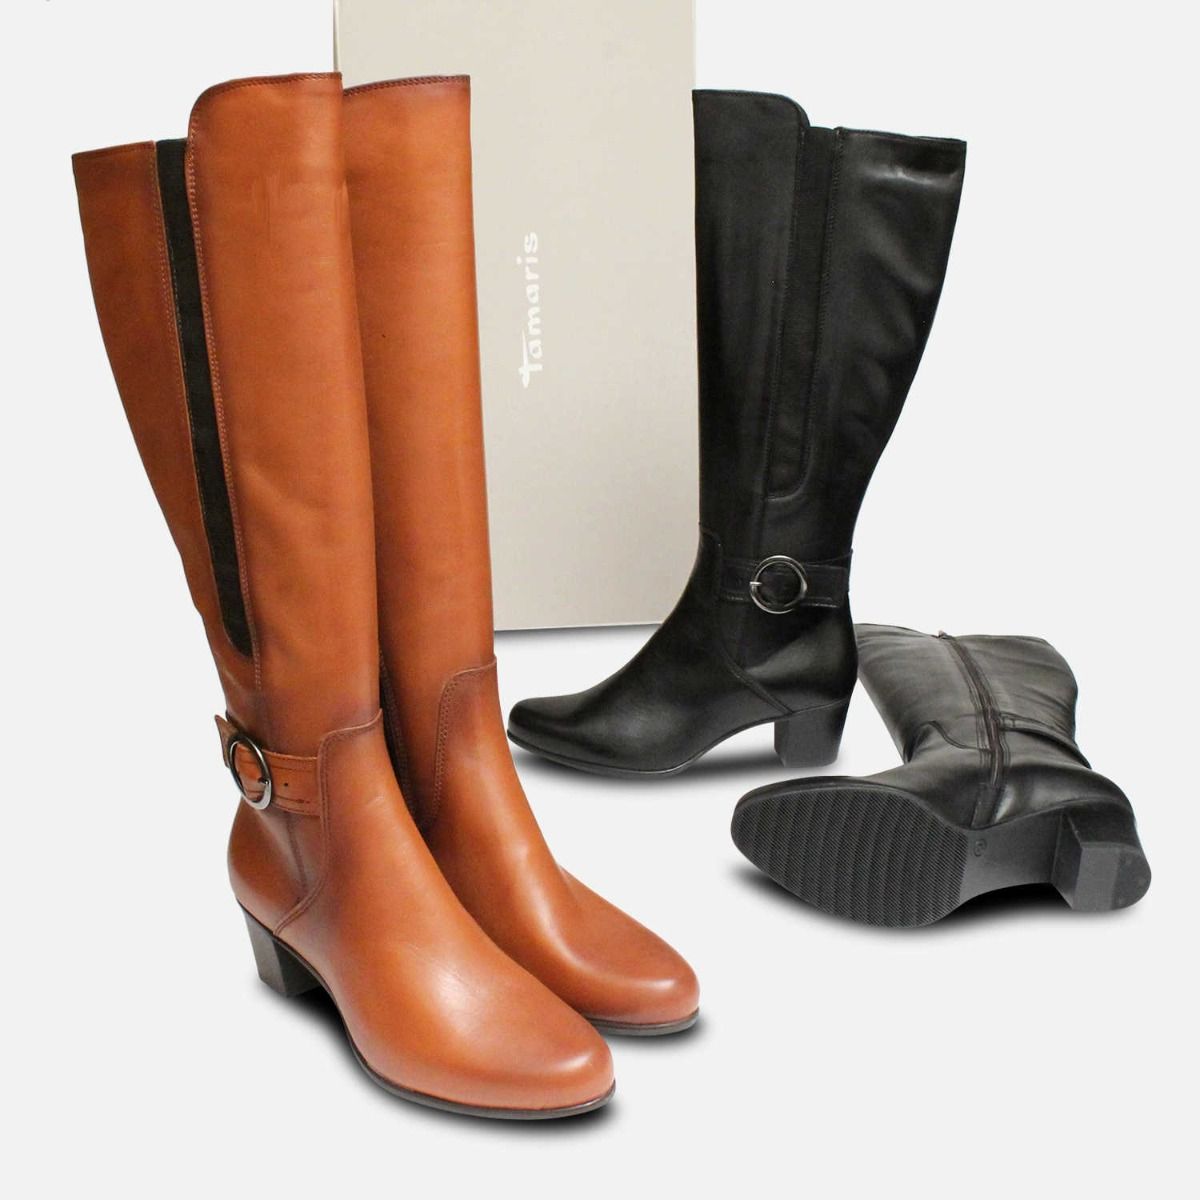 brown knee length boots